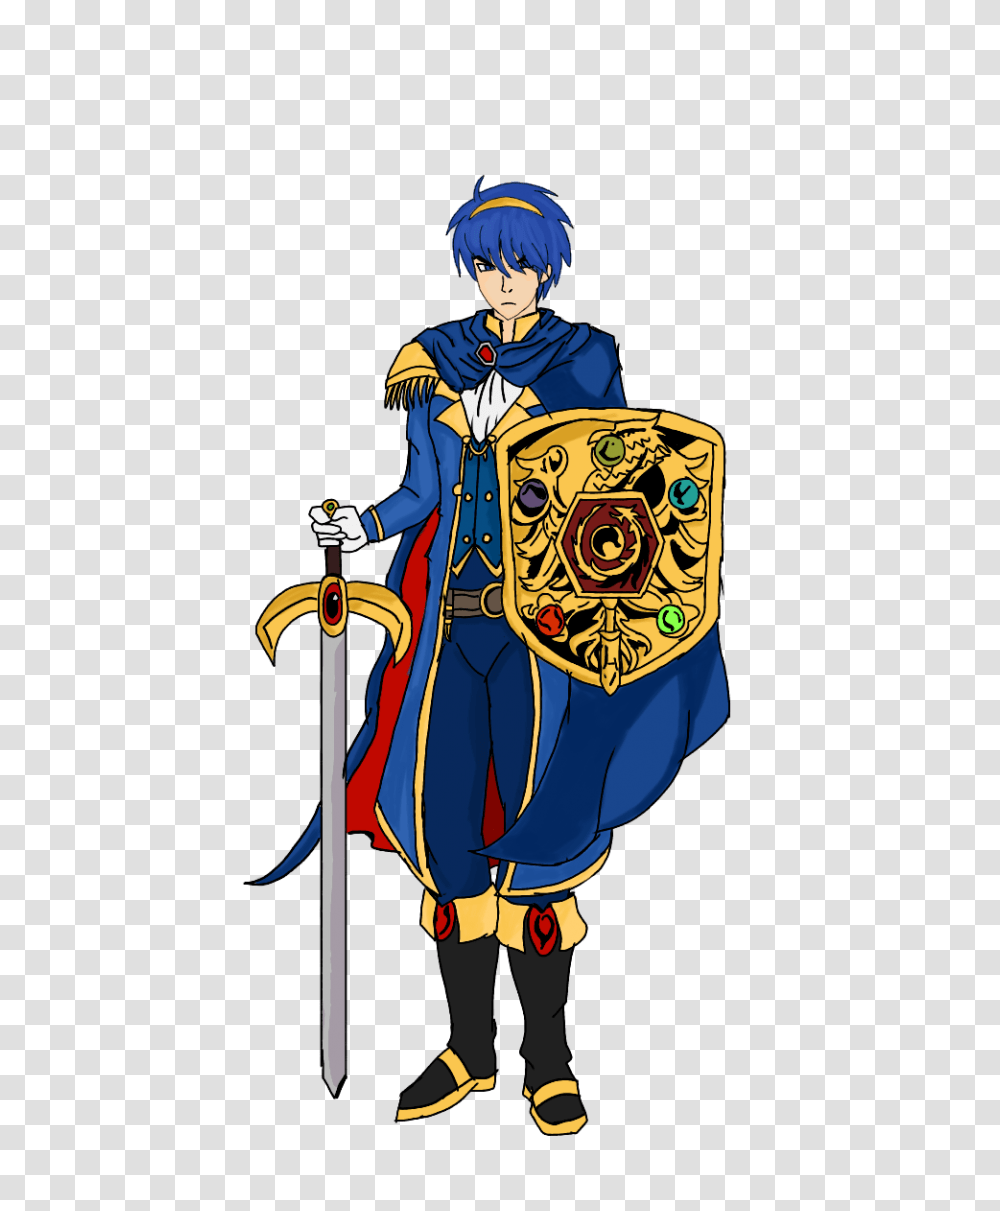 My Design For Brave Marth Fireemblemheroes, Person, Human, Armor, Shield Transparent Png